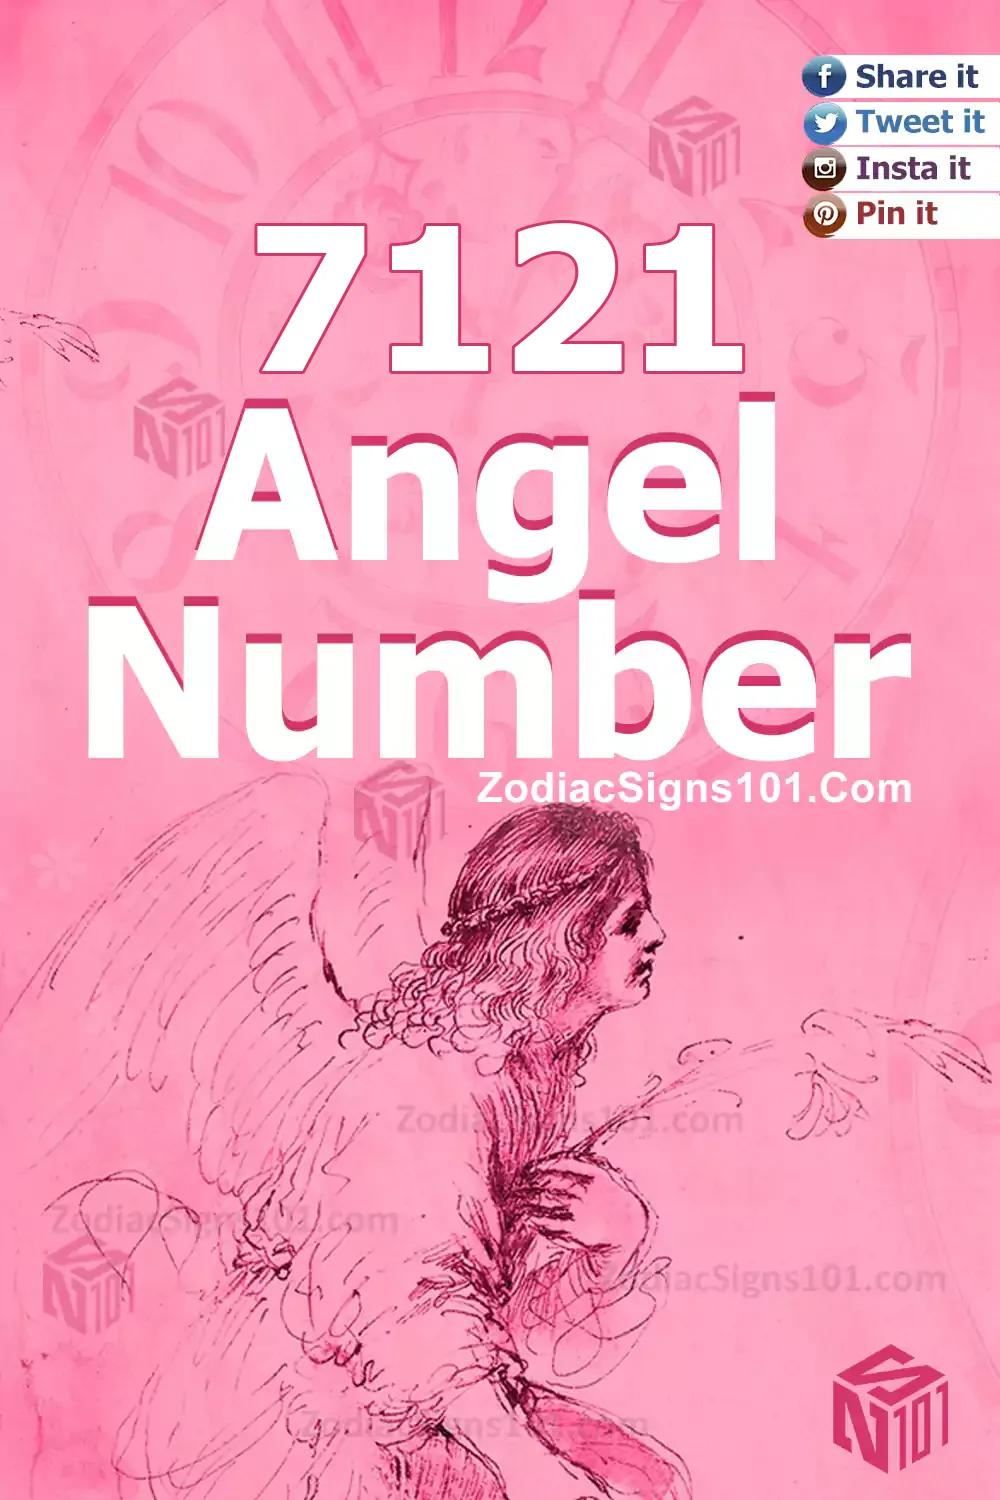 7121 Angel Number Meaning